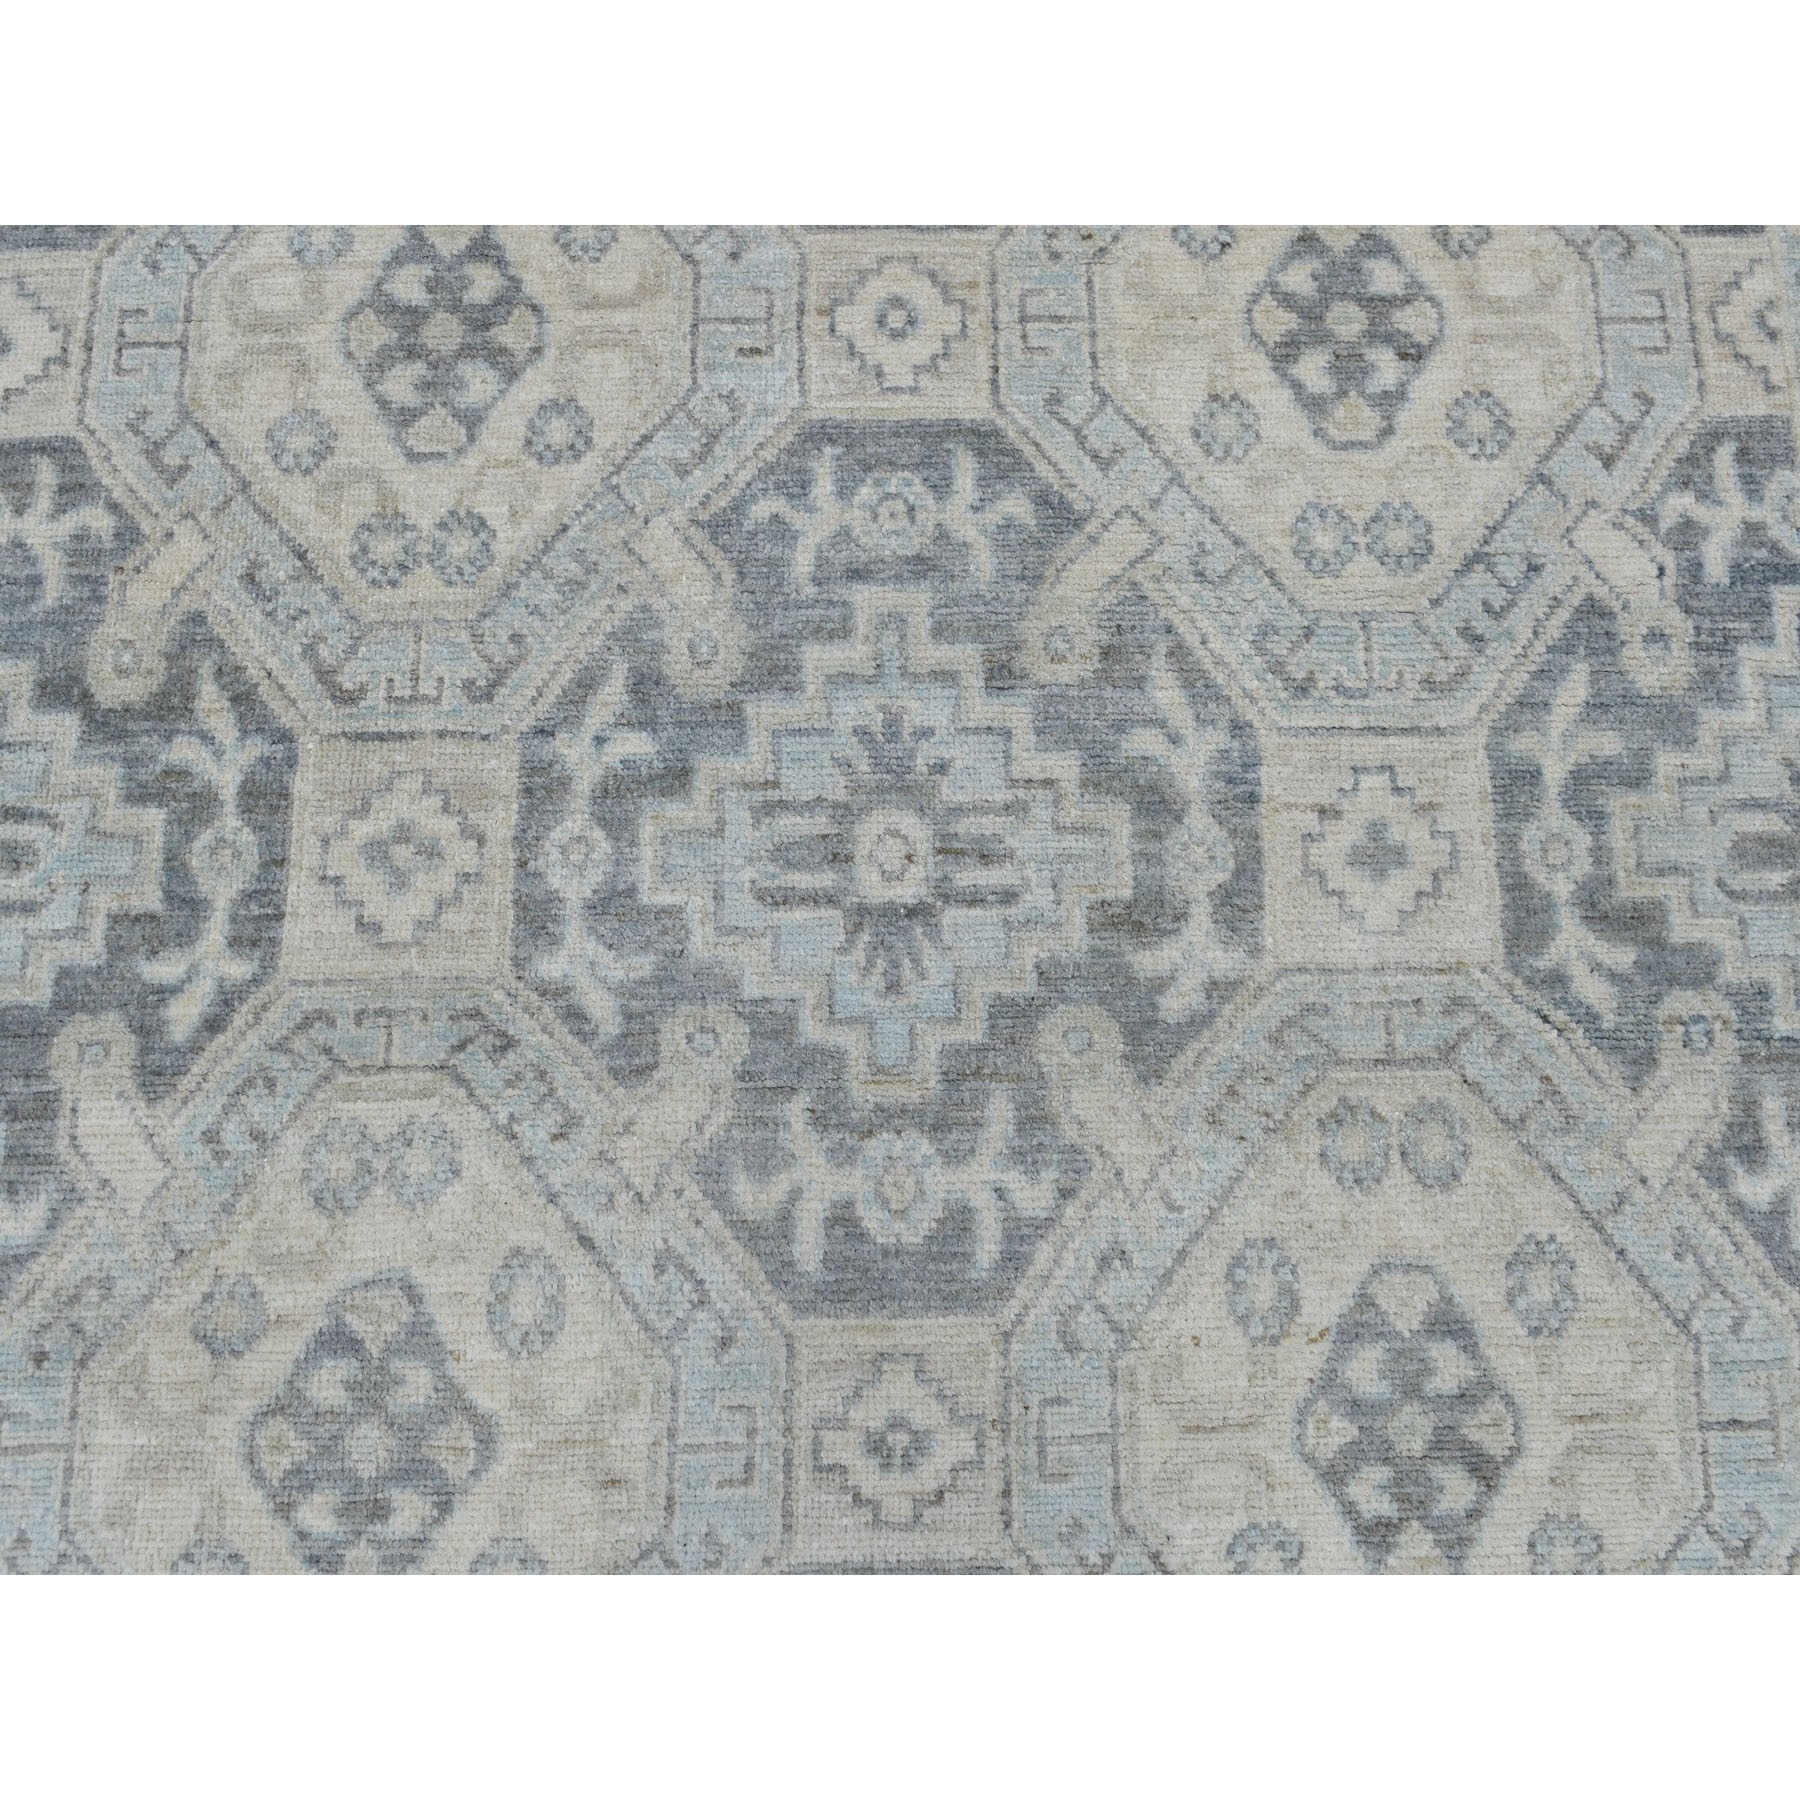 8-x10- White Wash Peshawar Pure Wool Hand Knotted Oriental Rug 